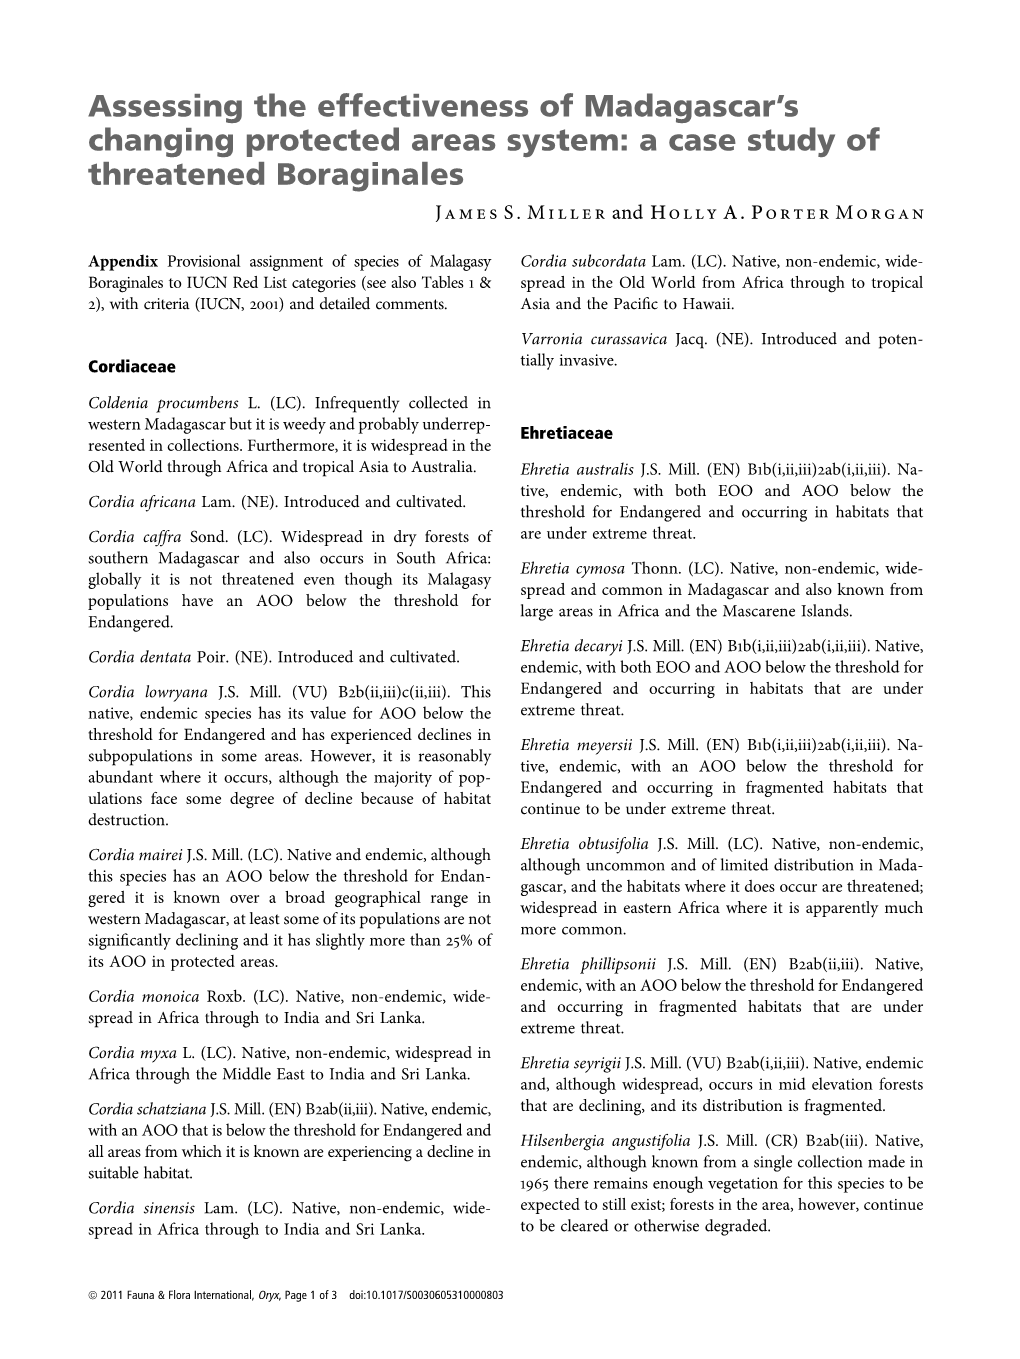 A Case Study of Threatened Boraginales J Ames S